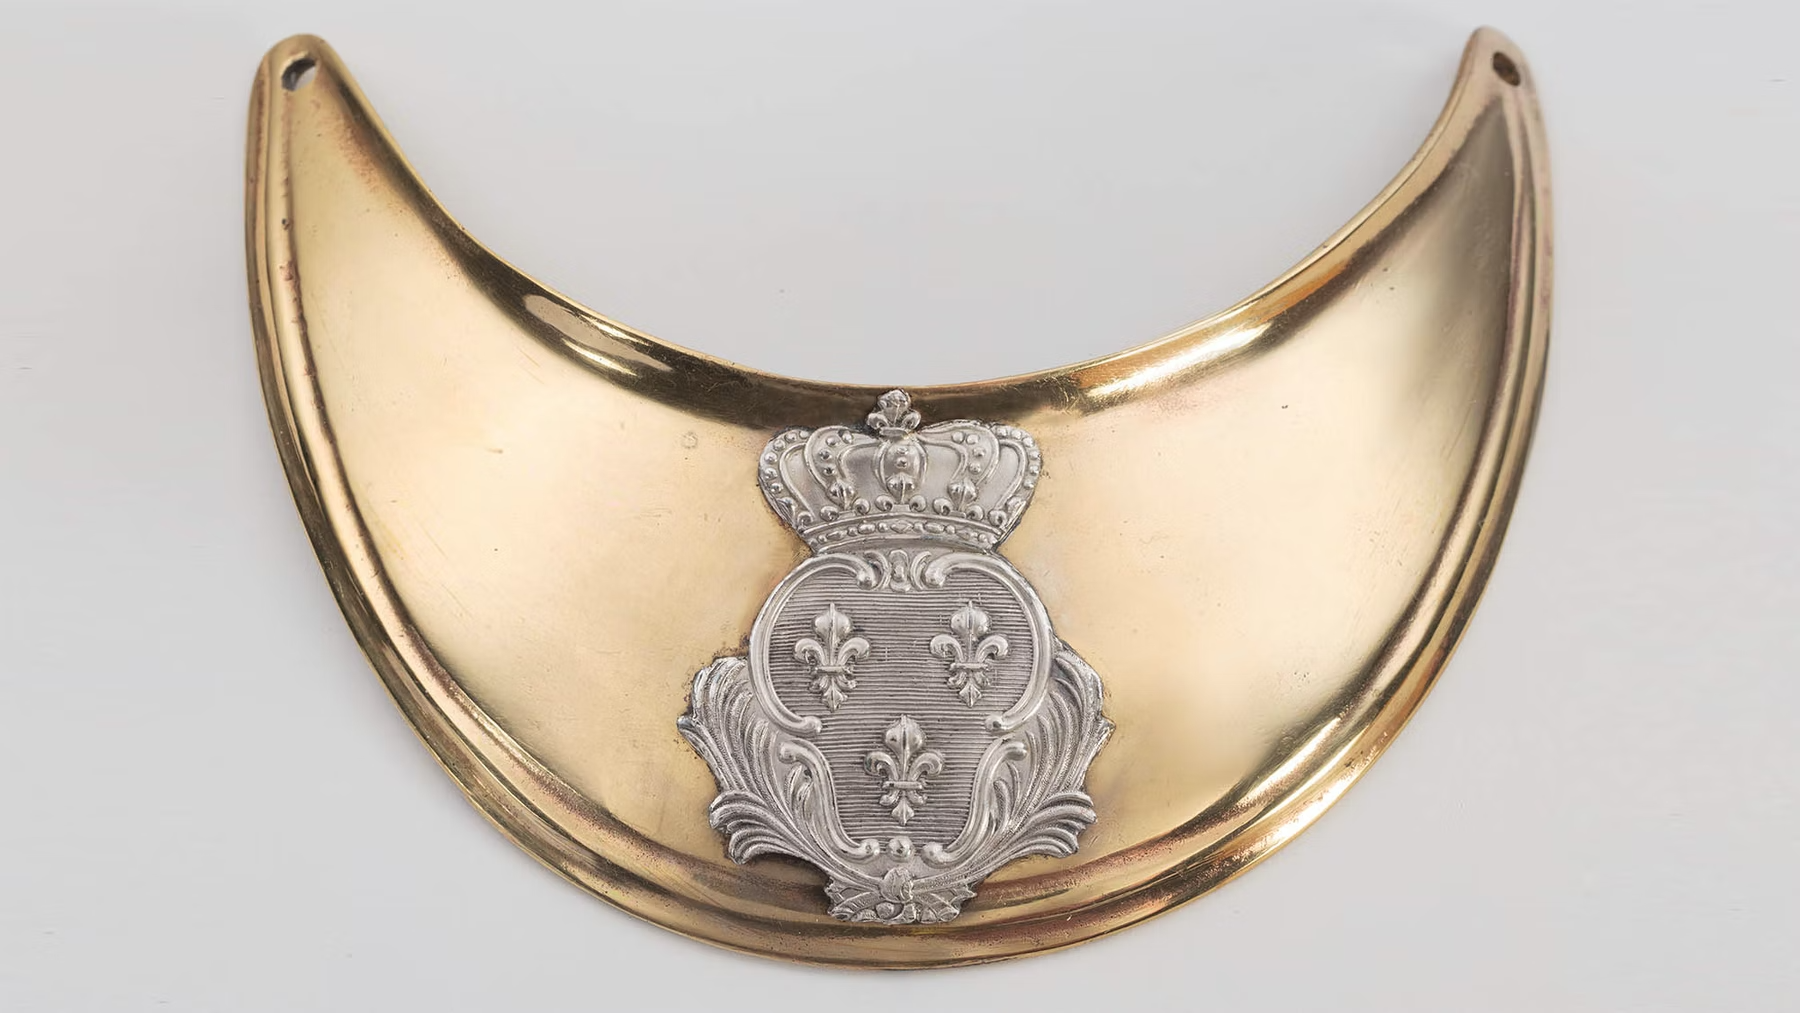 French officers wore a gorget like this one around their neck, as a symbol of their rank.